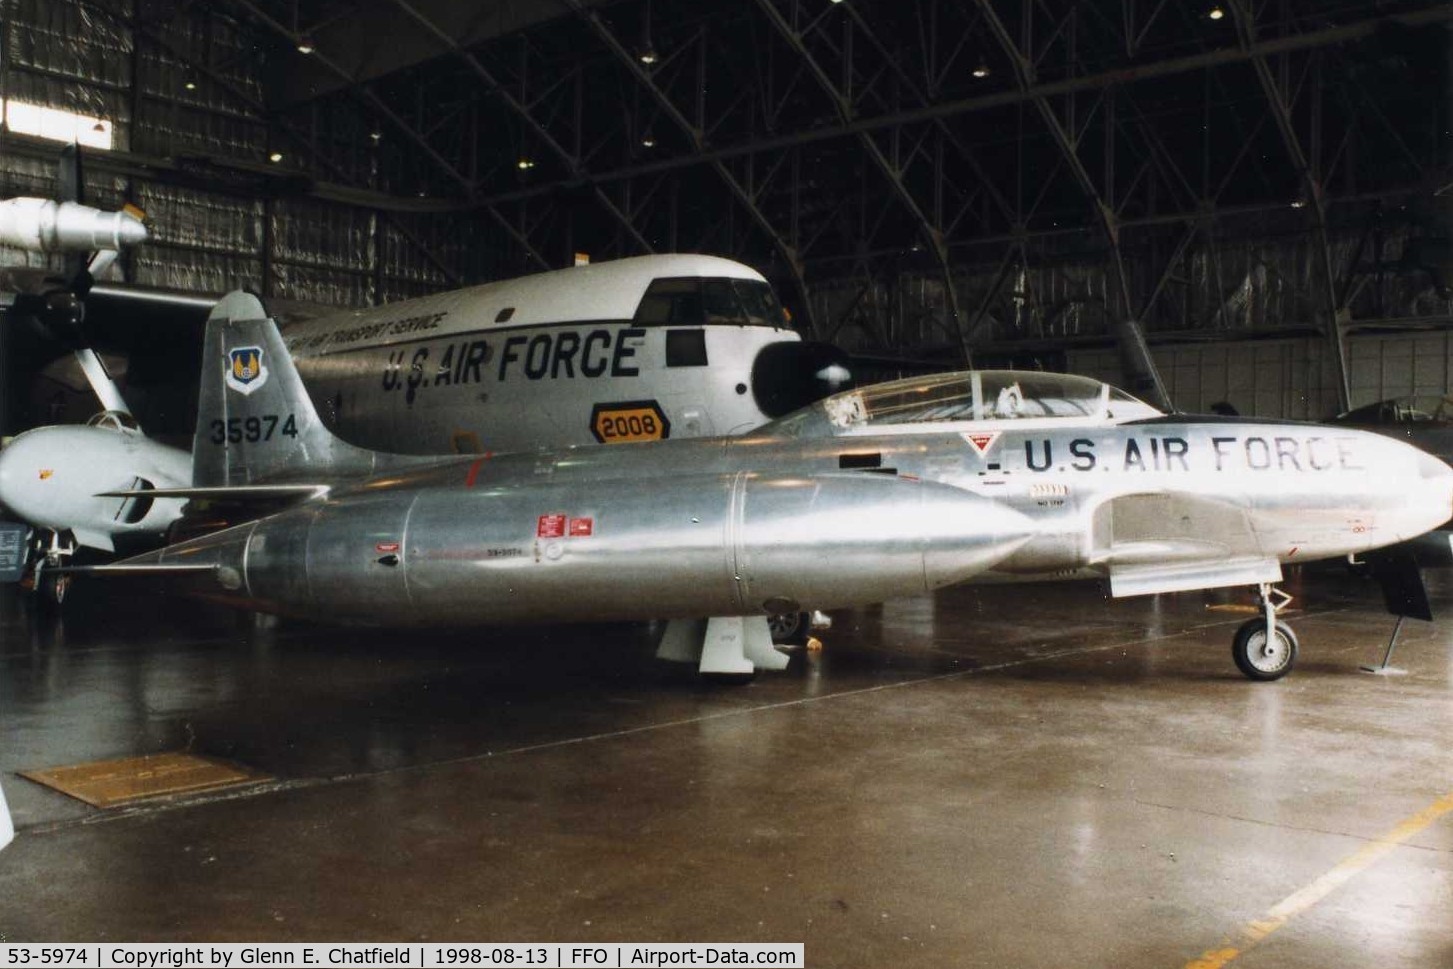 53-5974, 1953 Lockheed T-33A-5-LO Shooting Star C/N 580-9456, T-33A at the National Museum of the U.S. Air Force